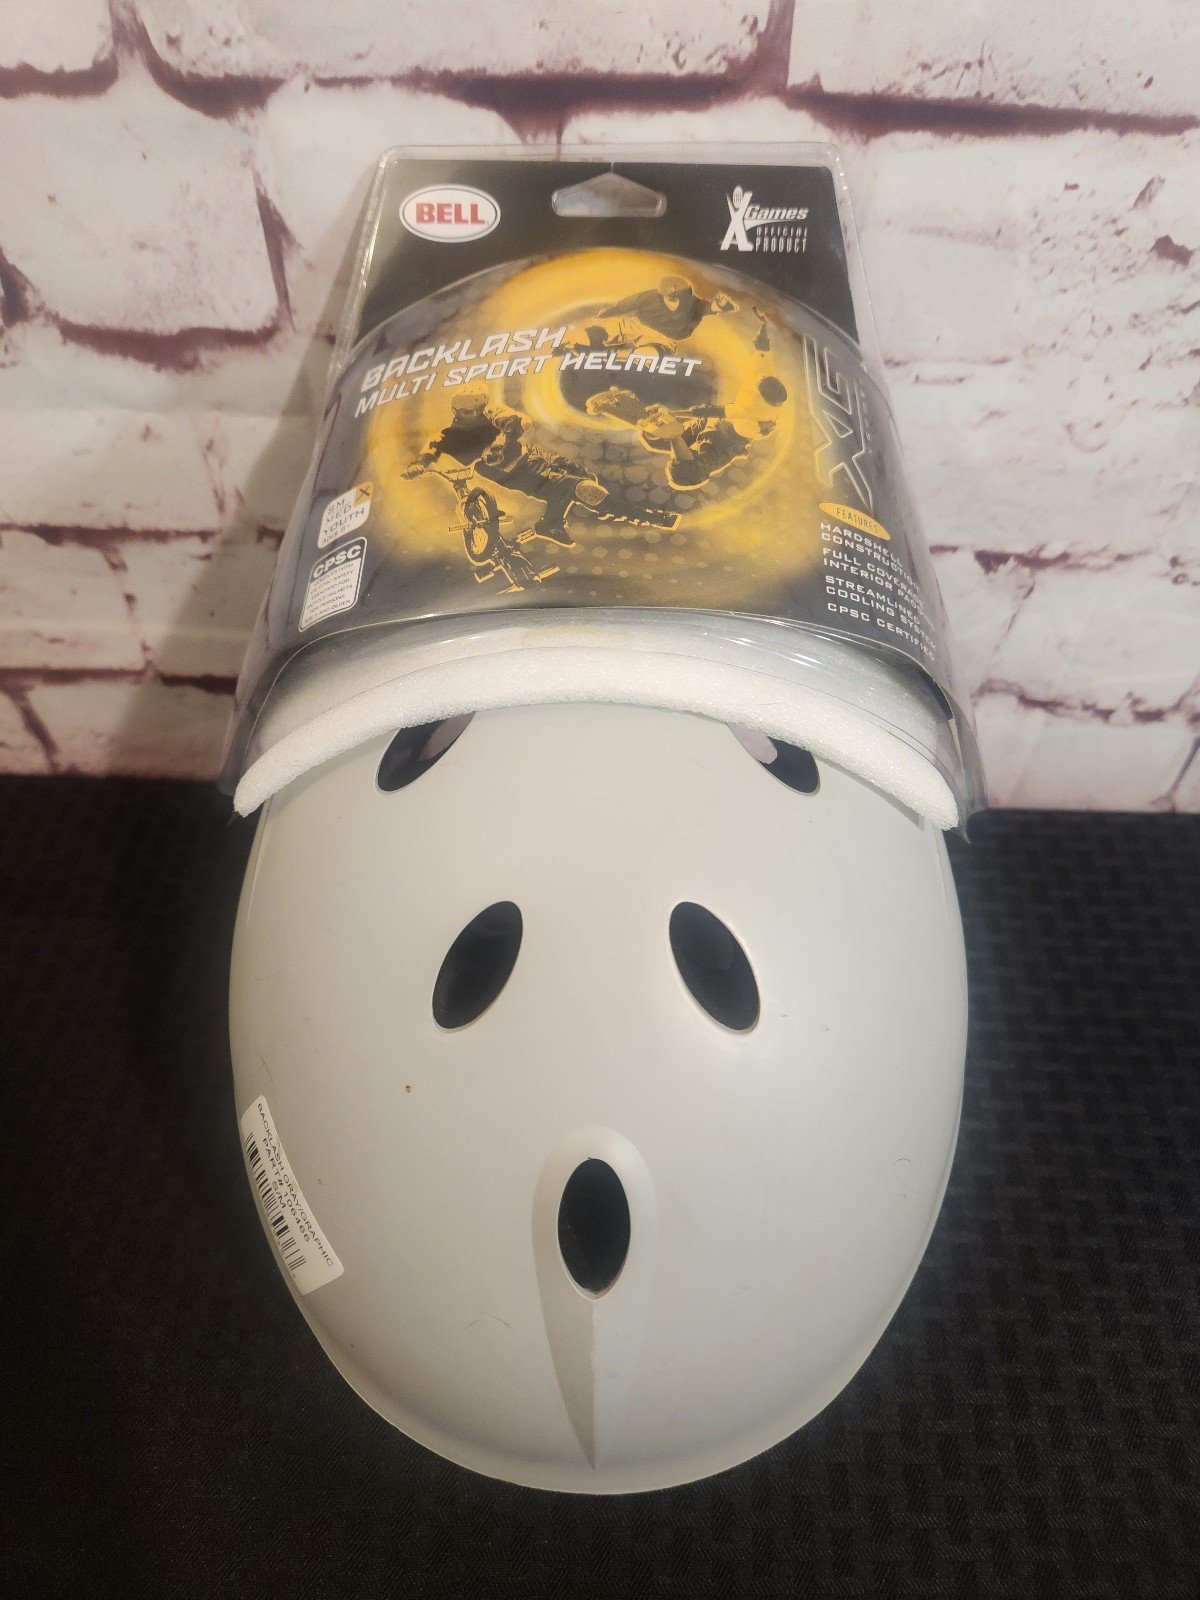 Bell X Games Youth Backlash Gray Multi-Sport Protection Helmet Small/Medium aw1qg34FT